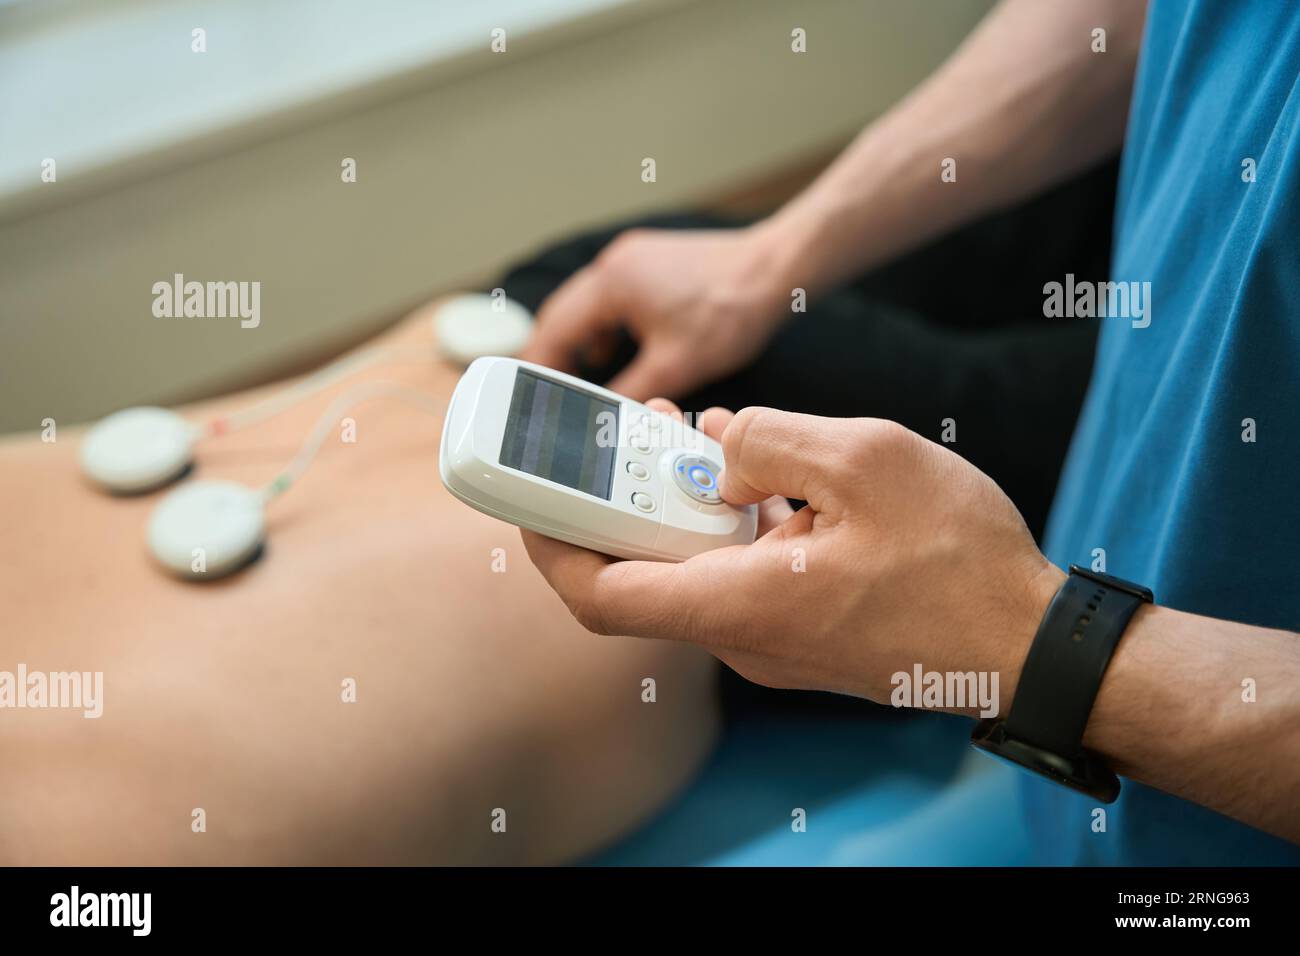 https://c8.alamy.com/comp/2RNG963/physiotherapist-performing-electrical-muscle-stimulation-on-adult-patient-2RNG963.jpg